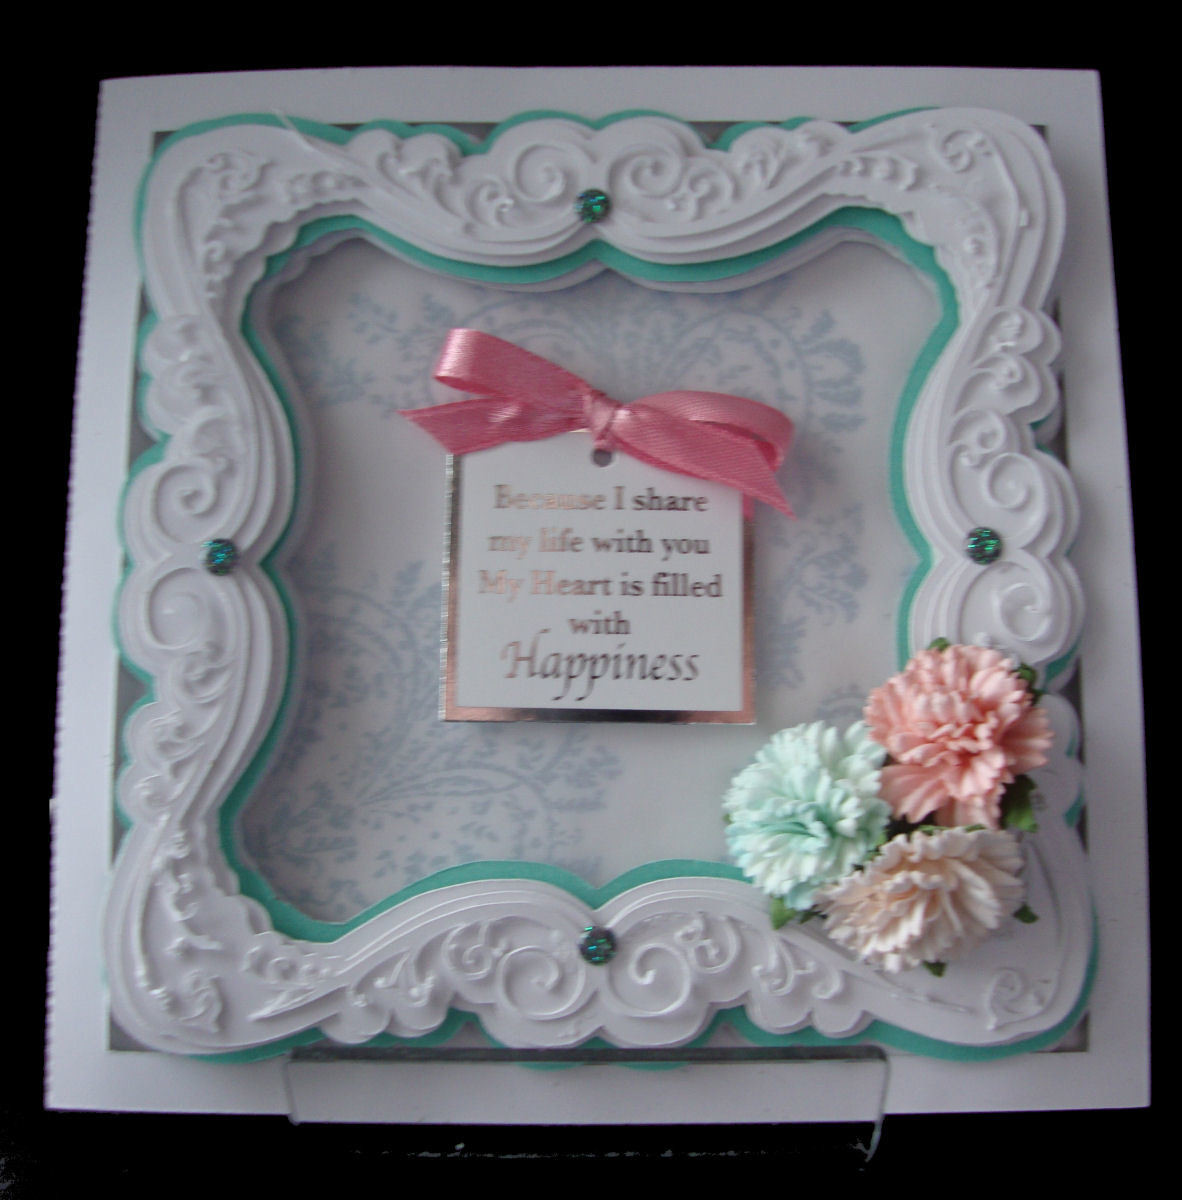 Faux Embossed Card Template No 3 Card with a 3 layered frame